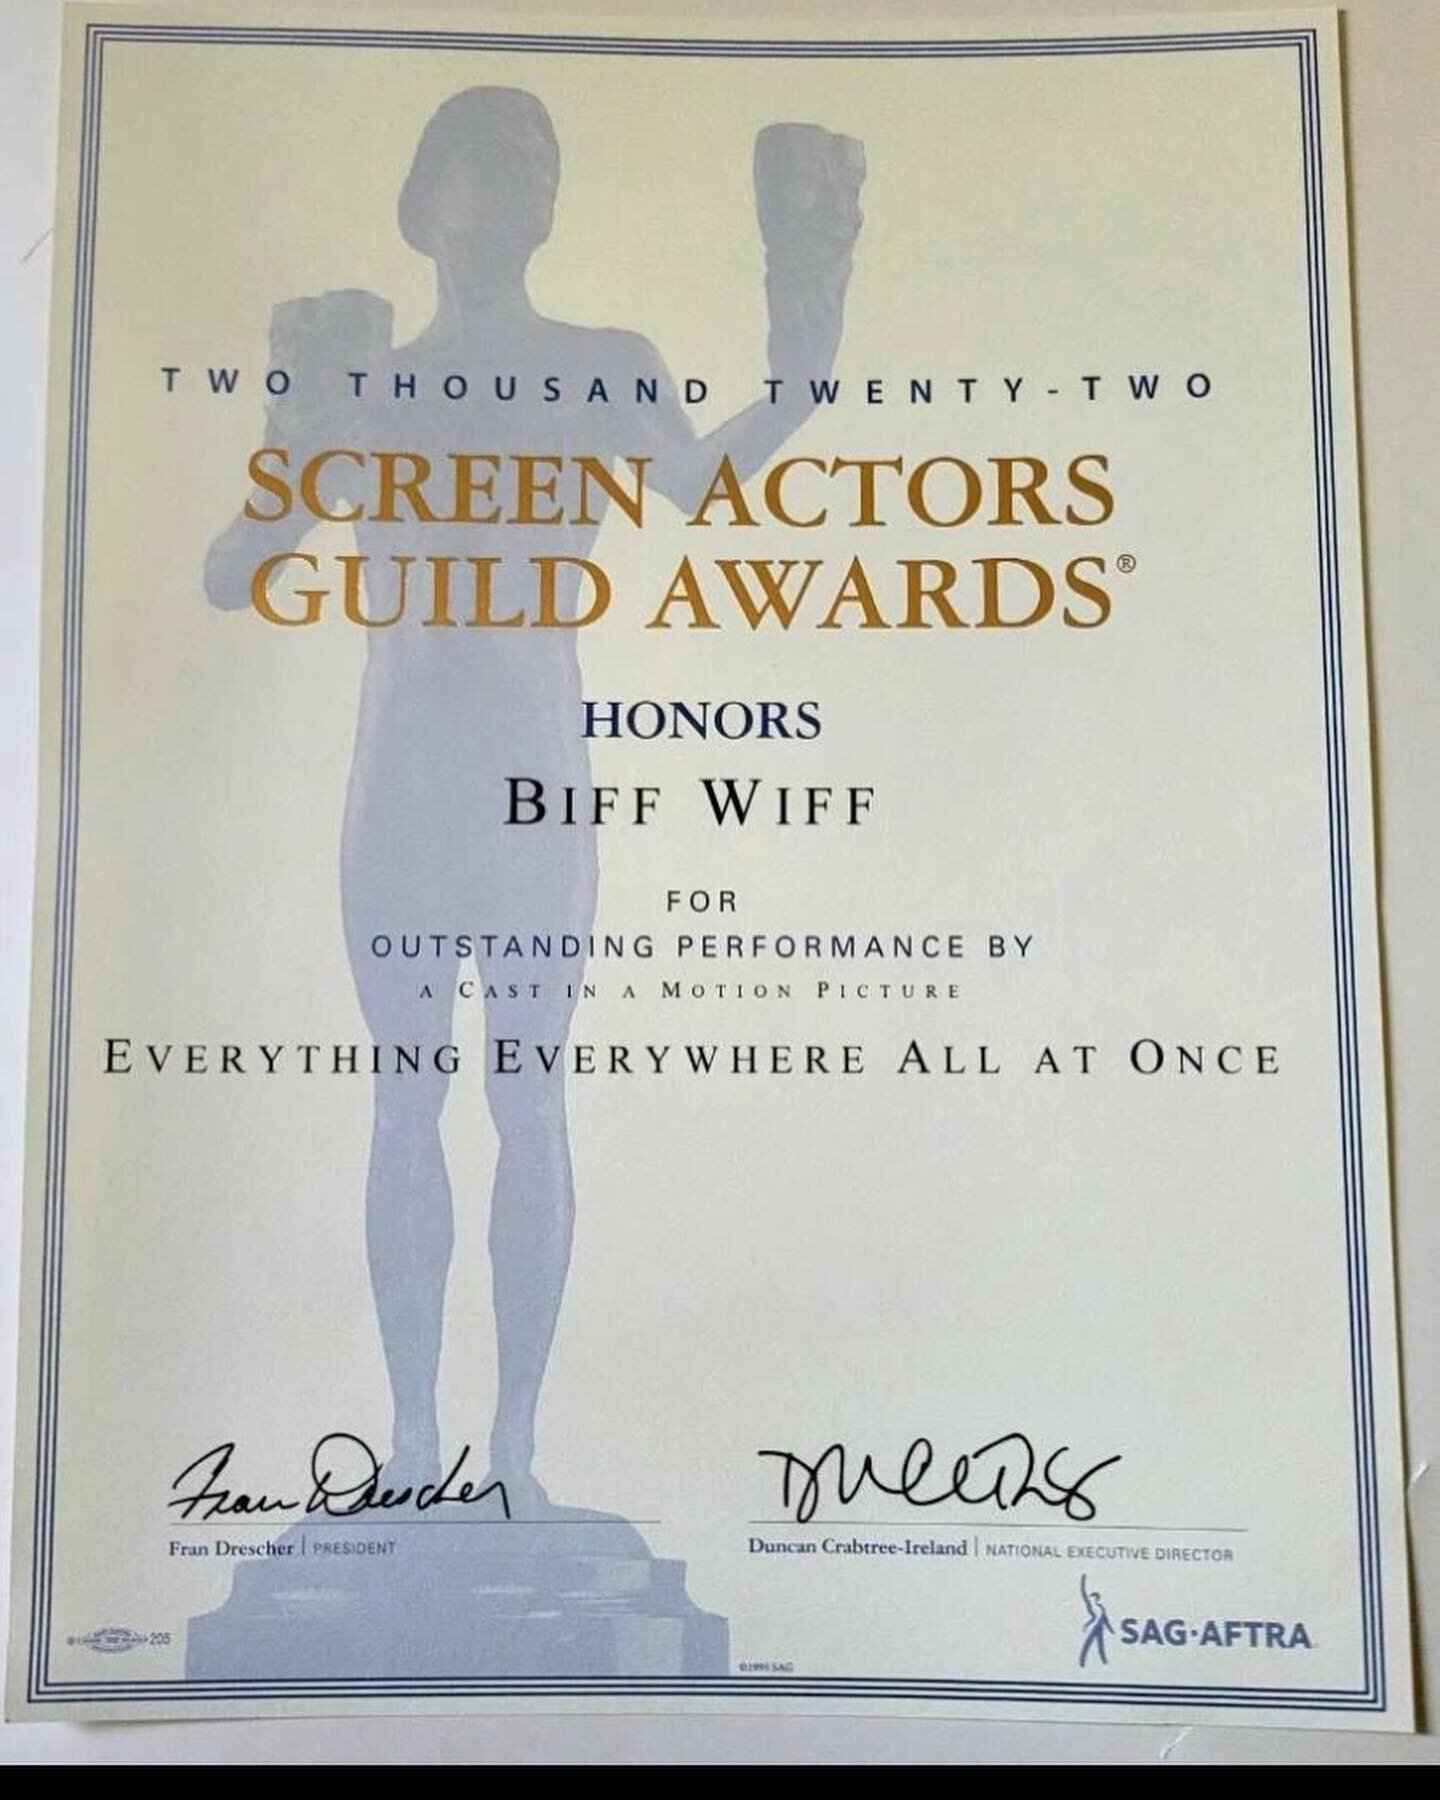 @sagawards honors our actor @biffwiff for his performance in #everythingeverywhereallatonce movie!!! #entlabtalent @everythingeverywheremovie #sagawards